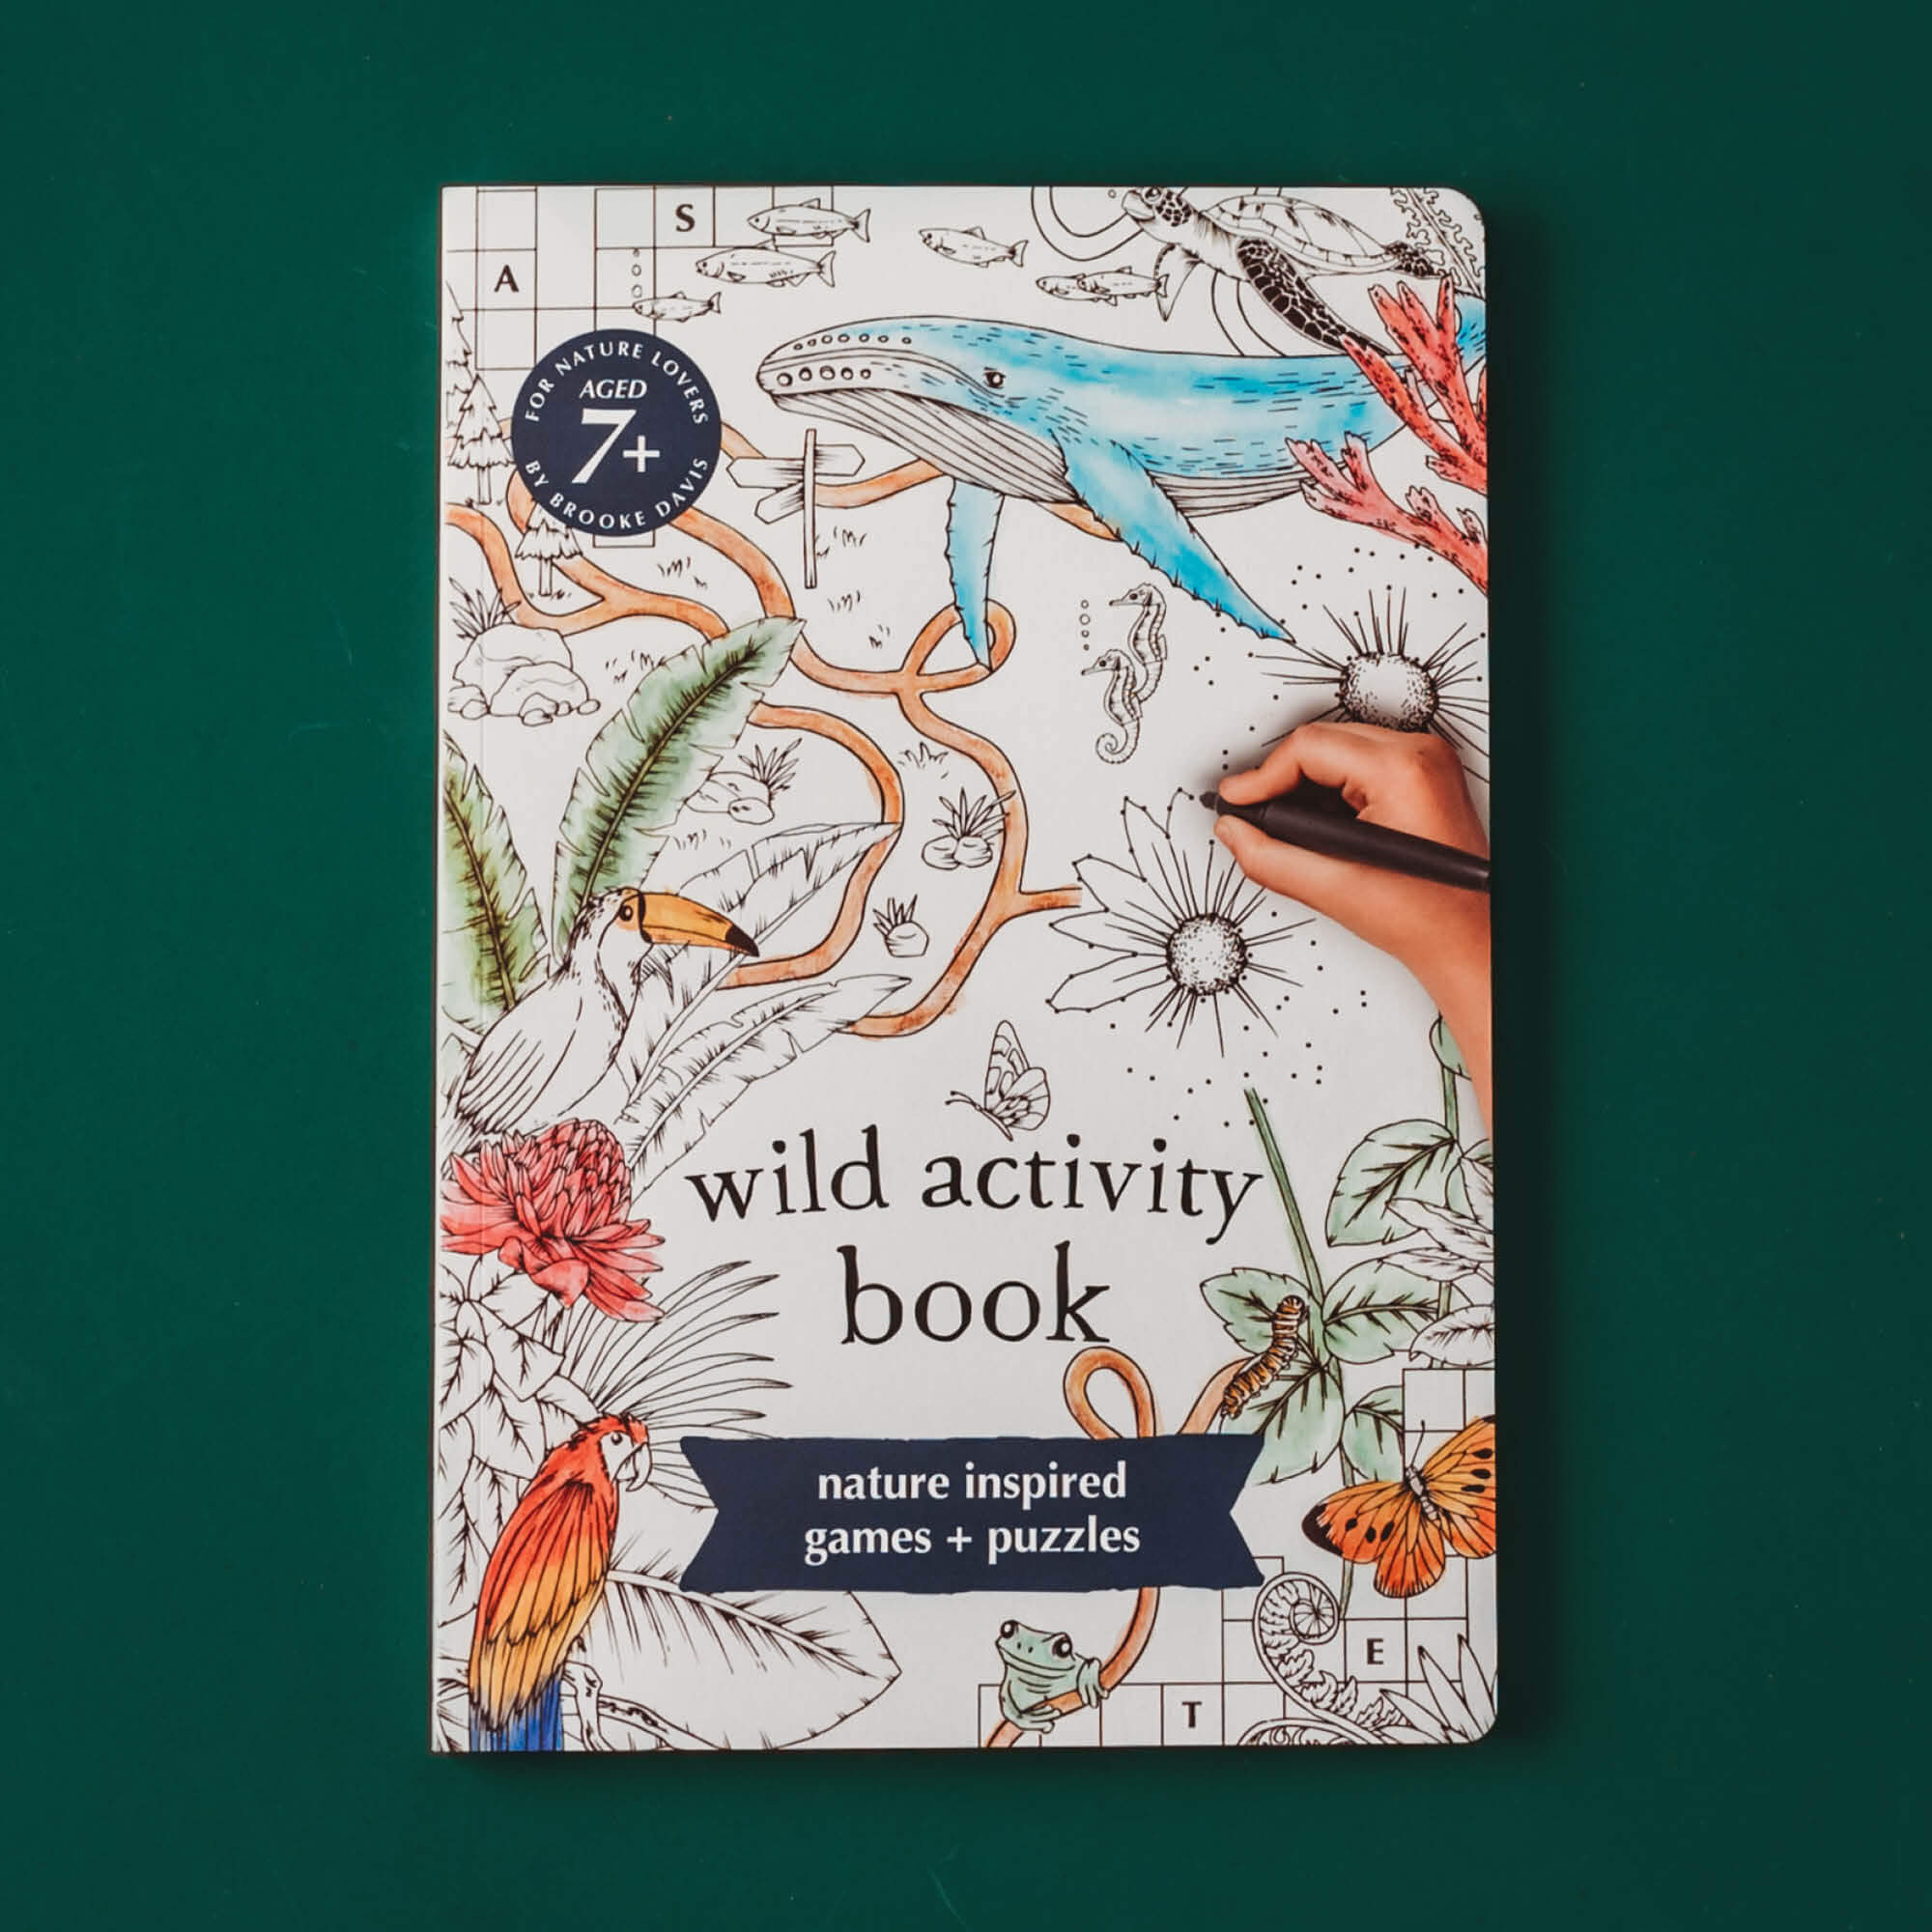 Wild Activity Book from Your Wild Books complete set of books for nature craft and play